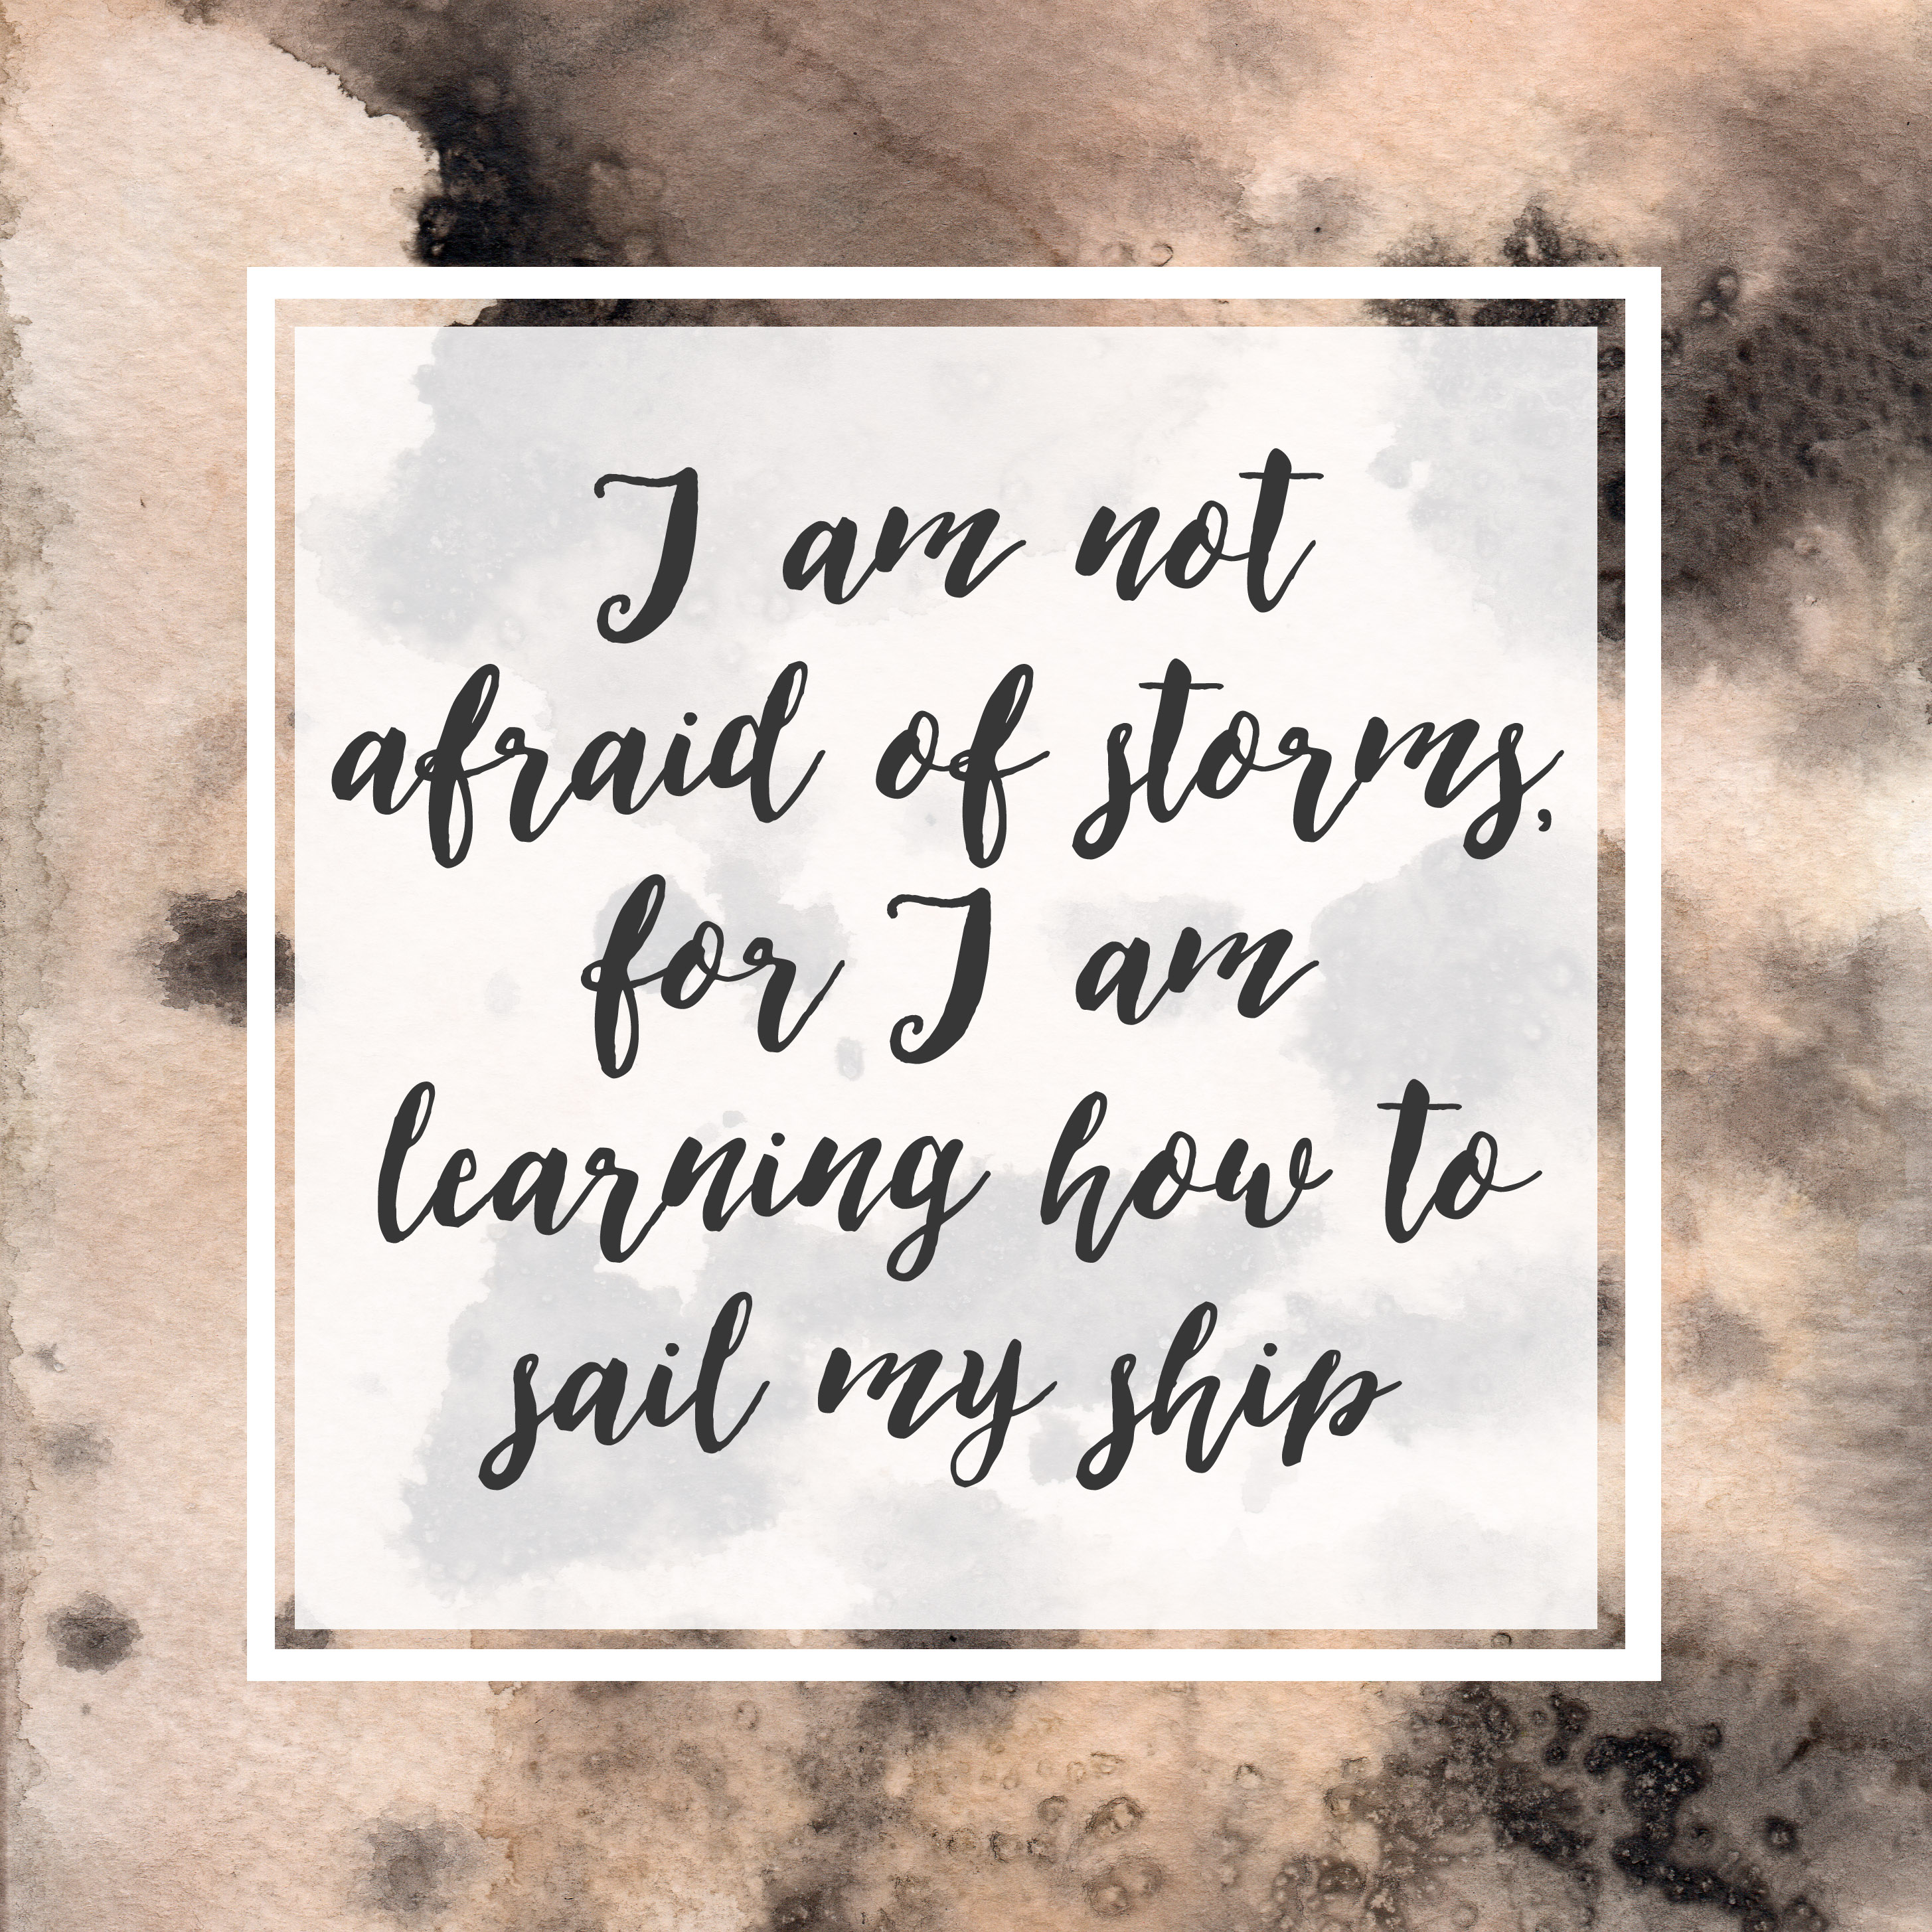 I am not afraid of storms, for I am learning how to sail my ship - amy march little women quote copy